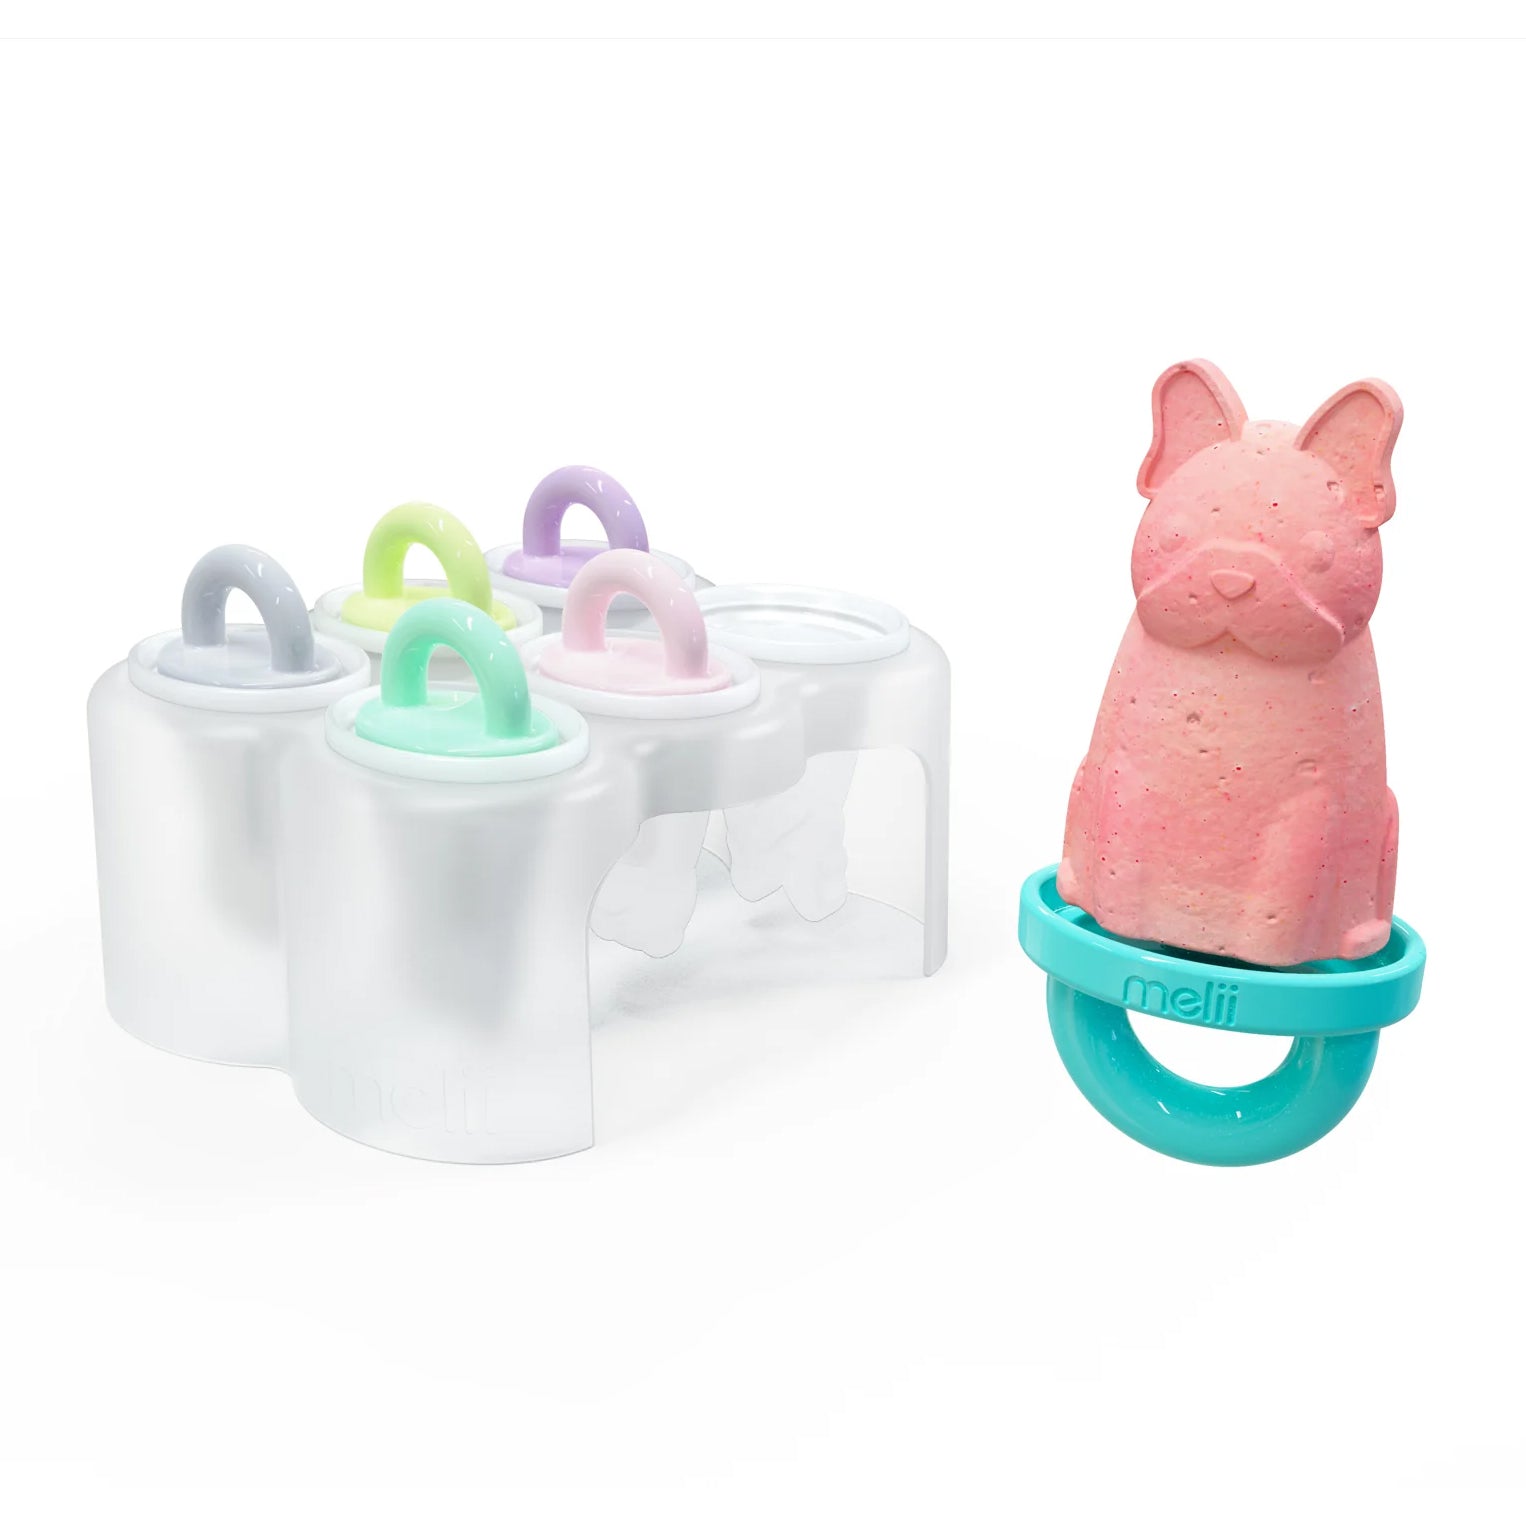 melii Animal Shaped Popsicle Molds - Fun & Unique Silicone Ice Pop Maker with Drip Guard Handle - Ideal Size for Kids - BPA Free, Teething Relief, Dishwasher Safe